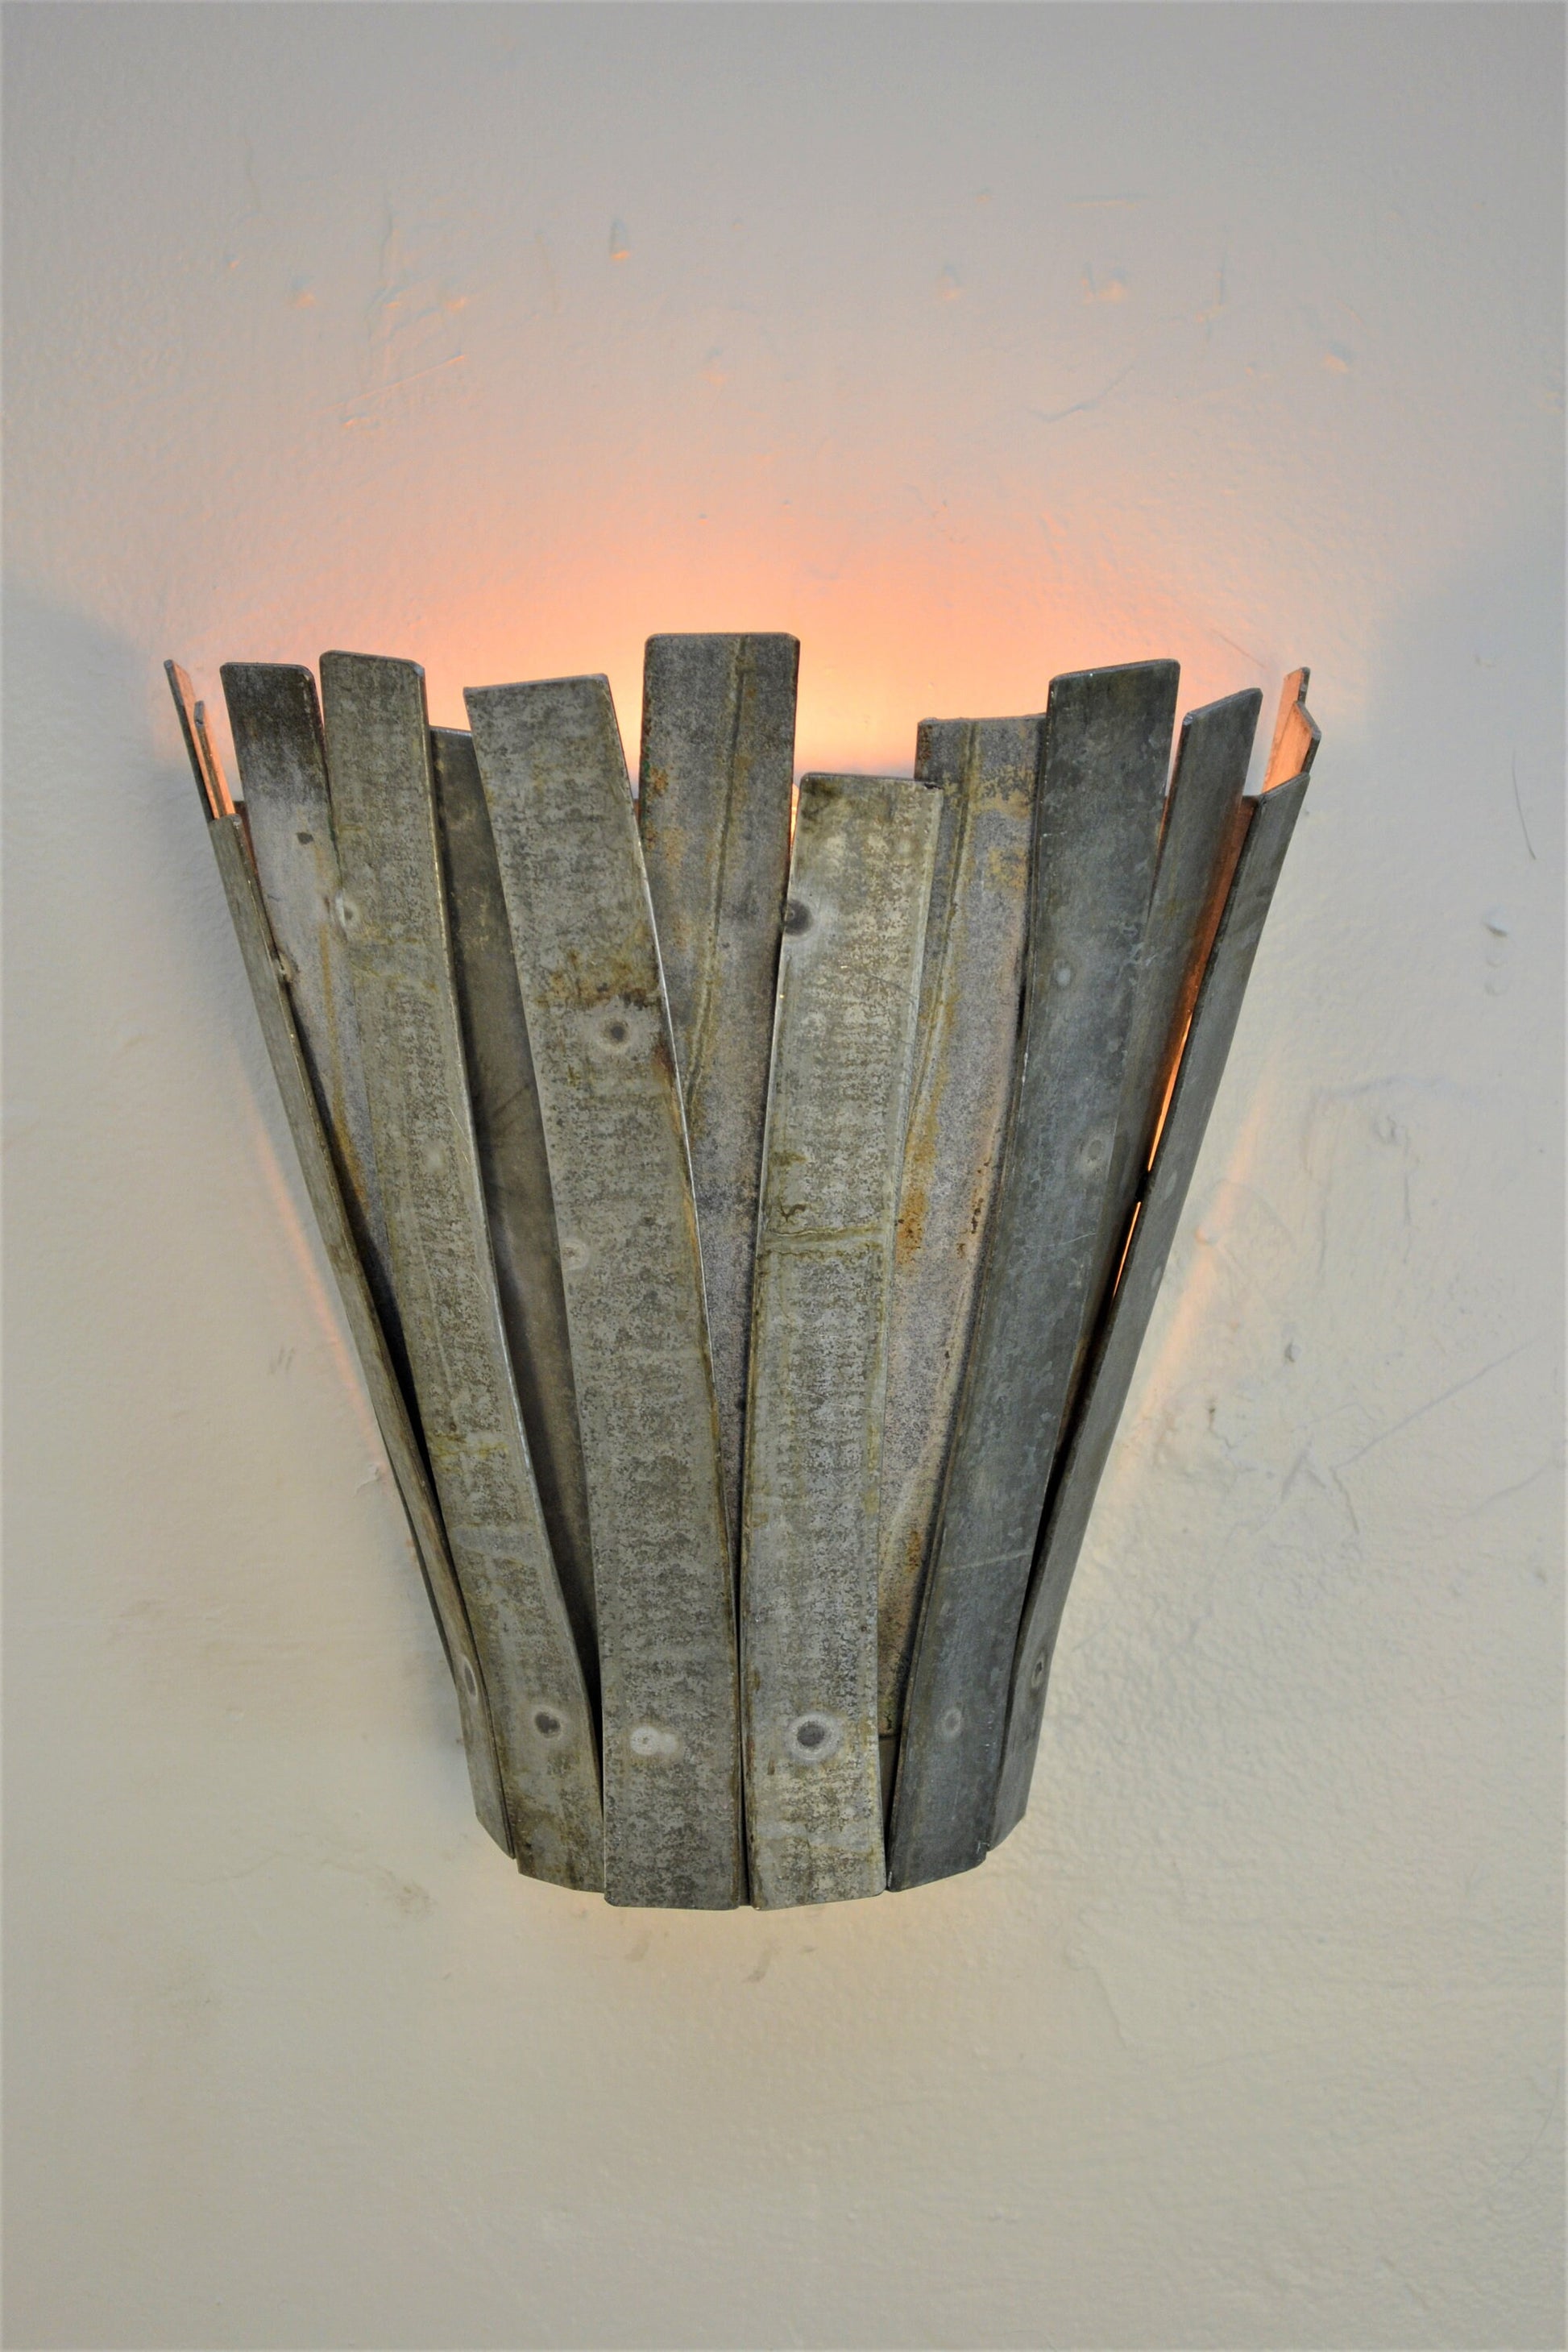 Wine Barrel Wall Sconce Light - Ifuru - Made from retired Napa wine barrel rings. 100% Recycled!